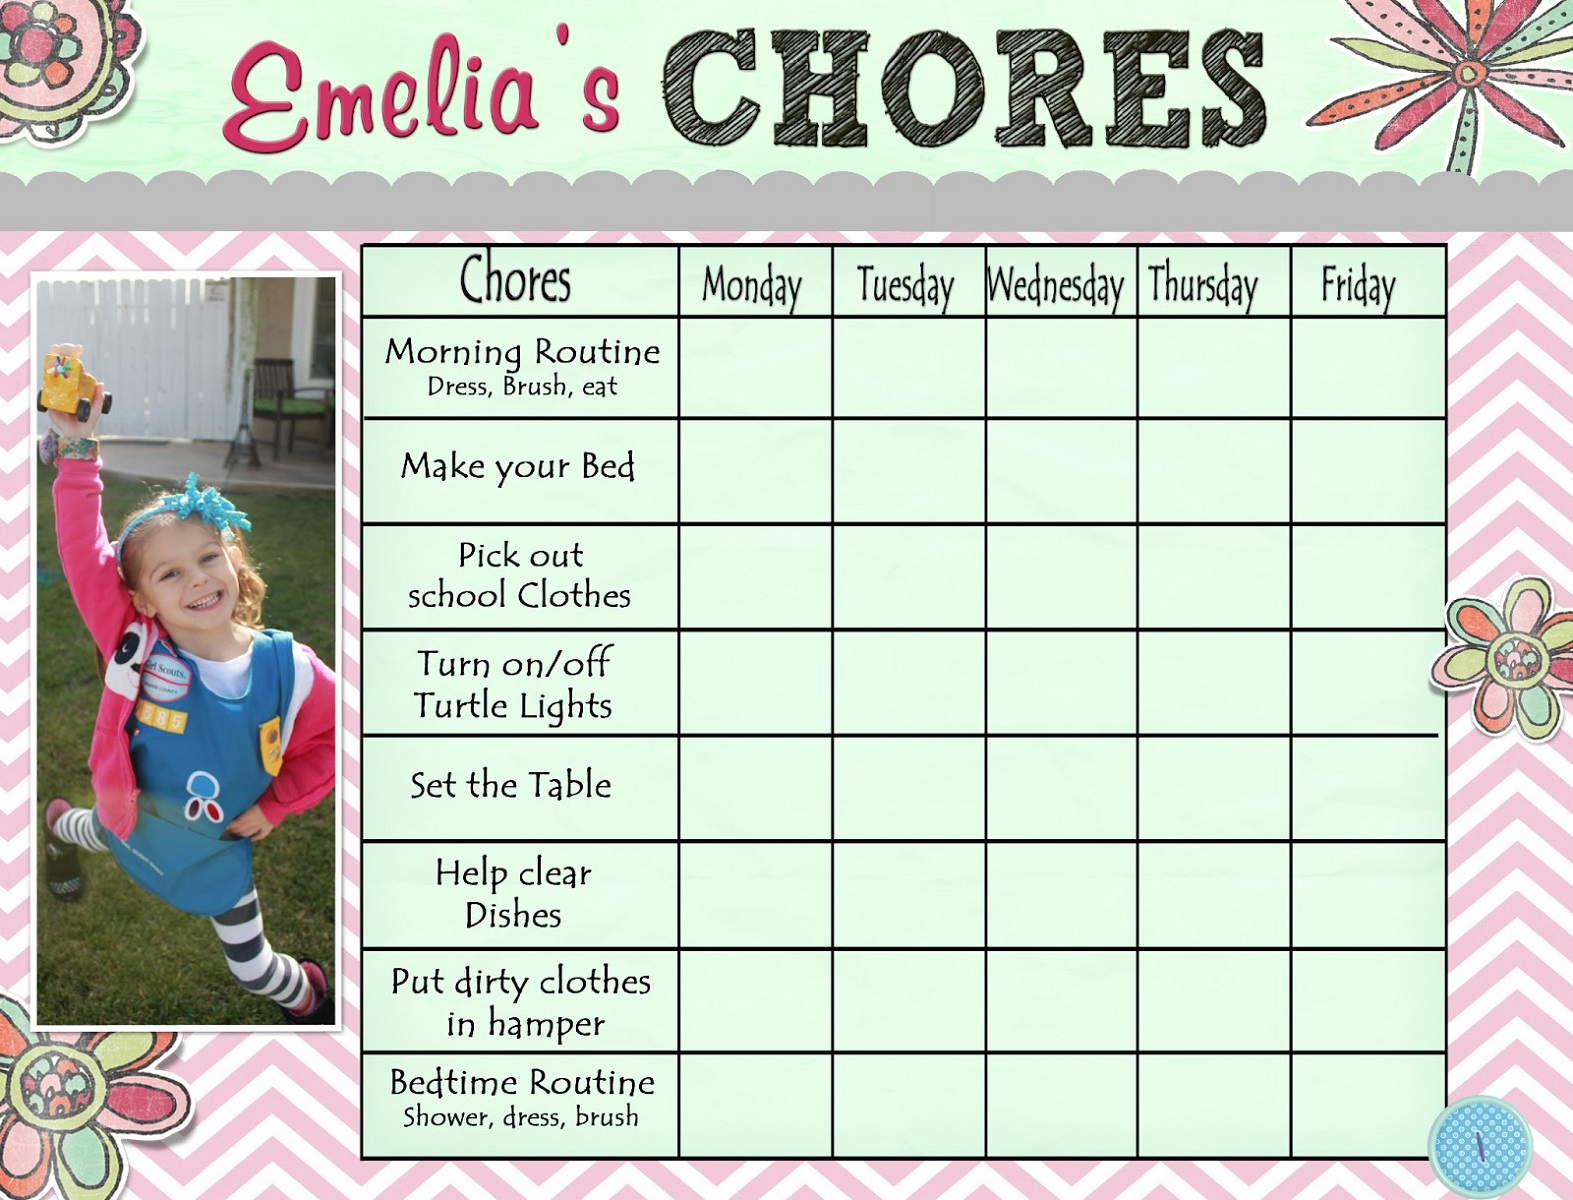 free printable chore charts for kids